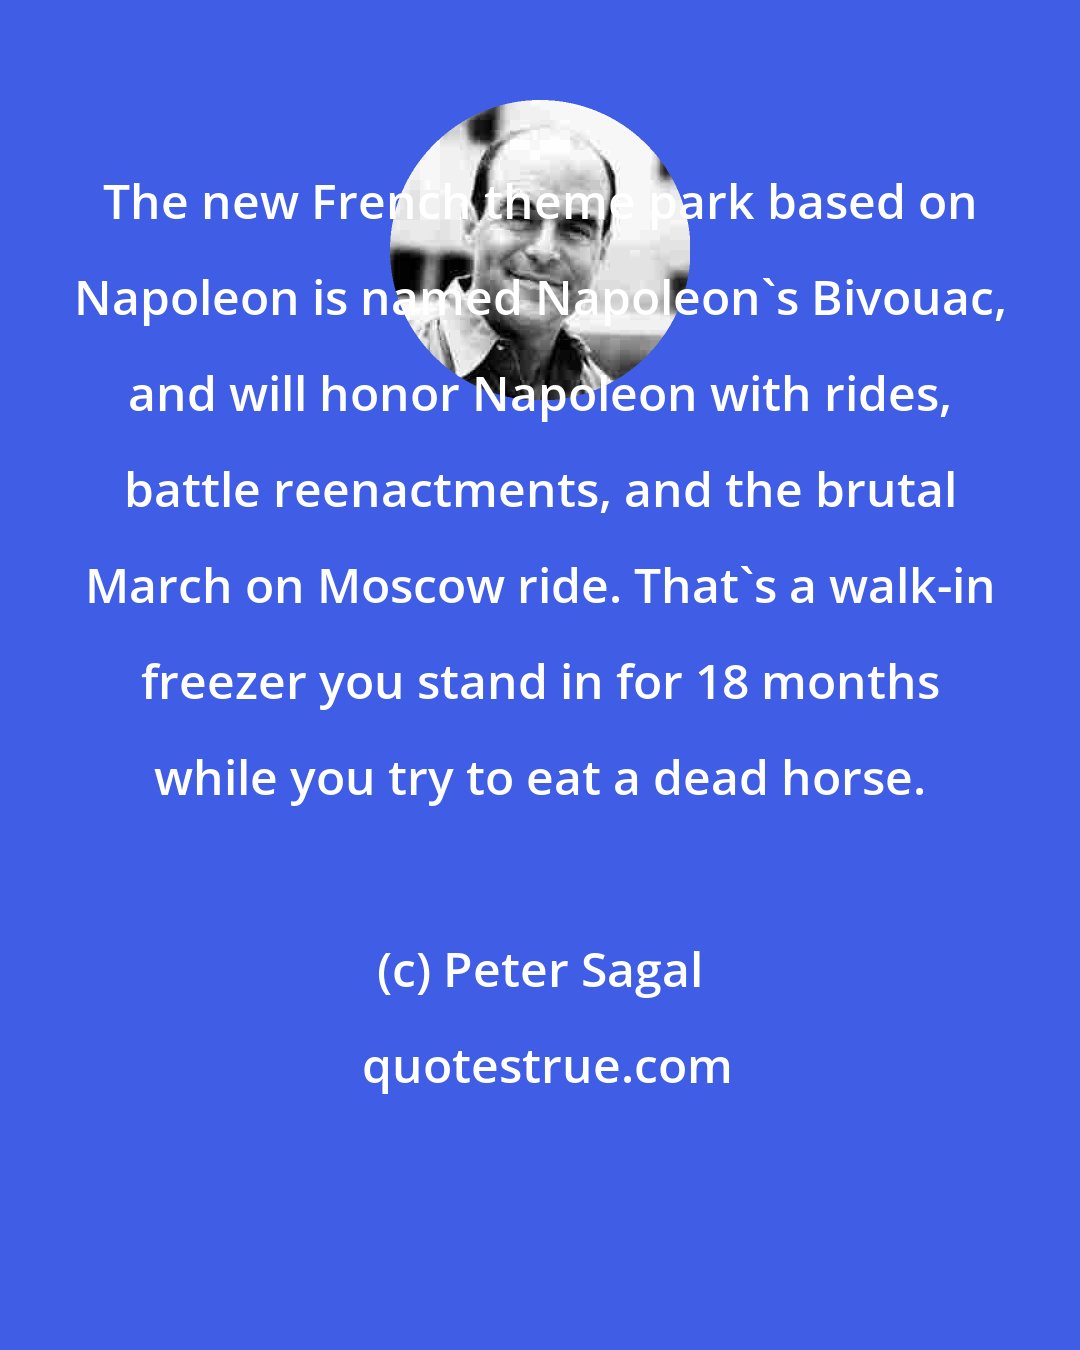 Peter Sagal: The new French theme park based on Napoleon is named Napoleon's Bivouac, and will honor Napoleon with rides, battle reenactments, and the brutal March on Moscow ride. That's a walk-in freezer you stand in for 18 months while you try to eat a dead horse.